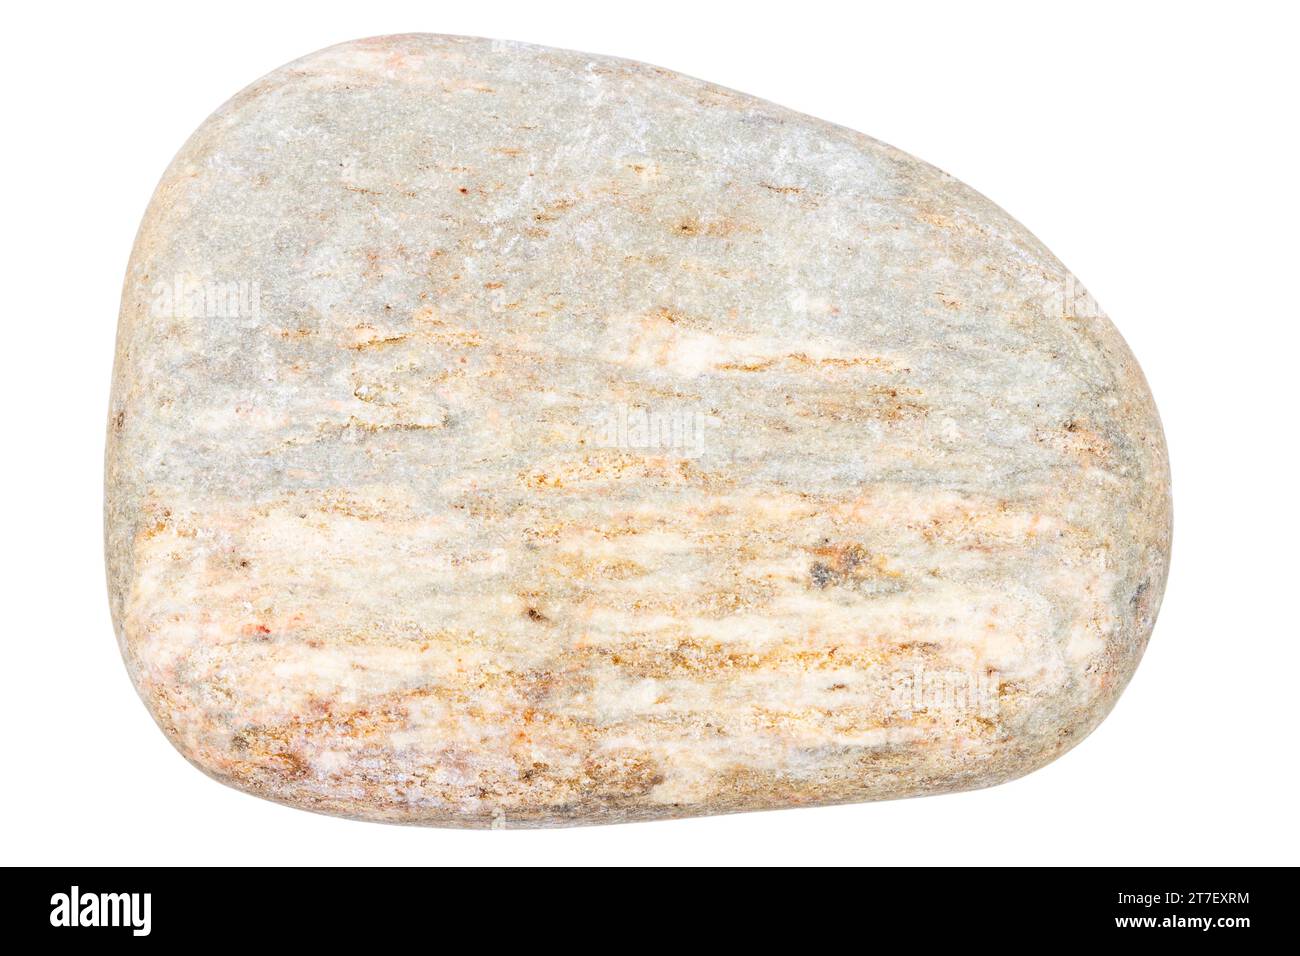 Top view of single red pebble isolated on white background. Stock Photo